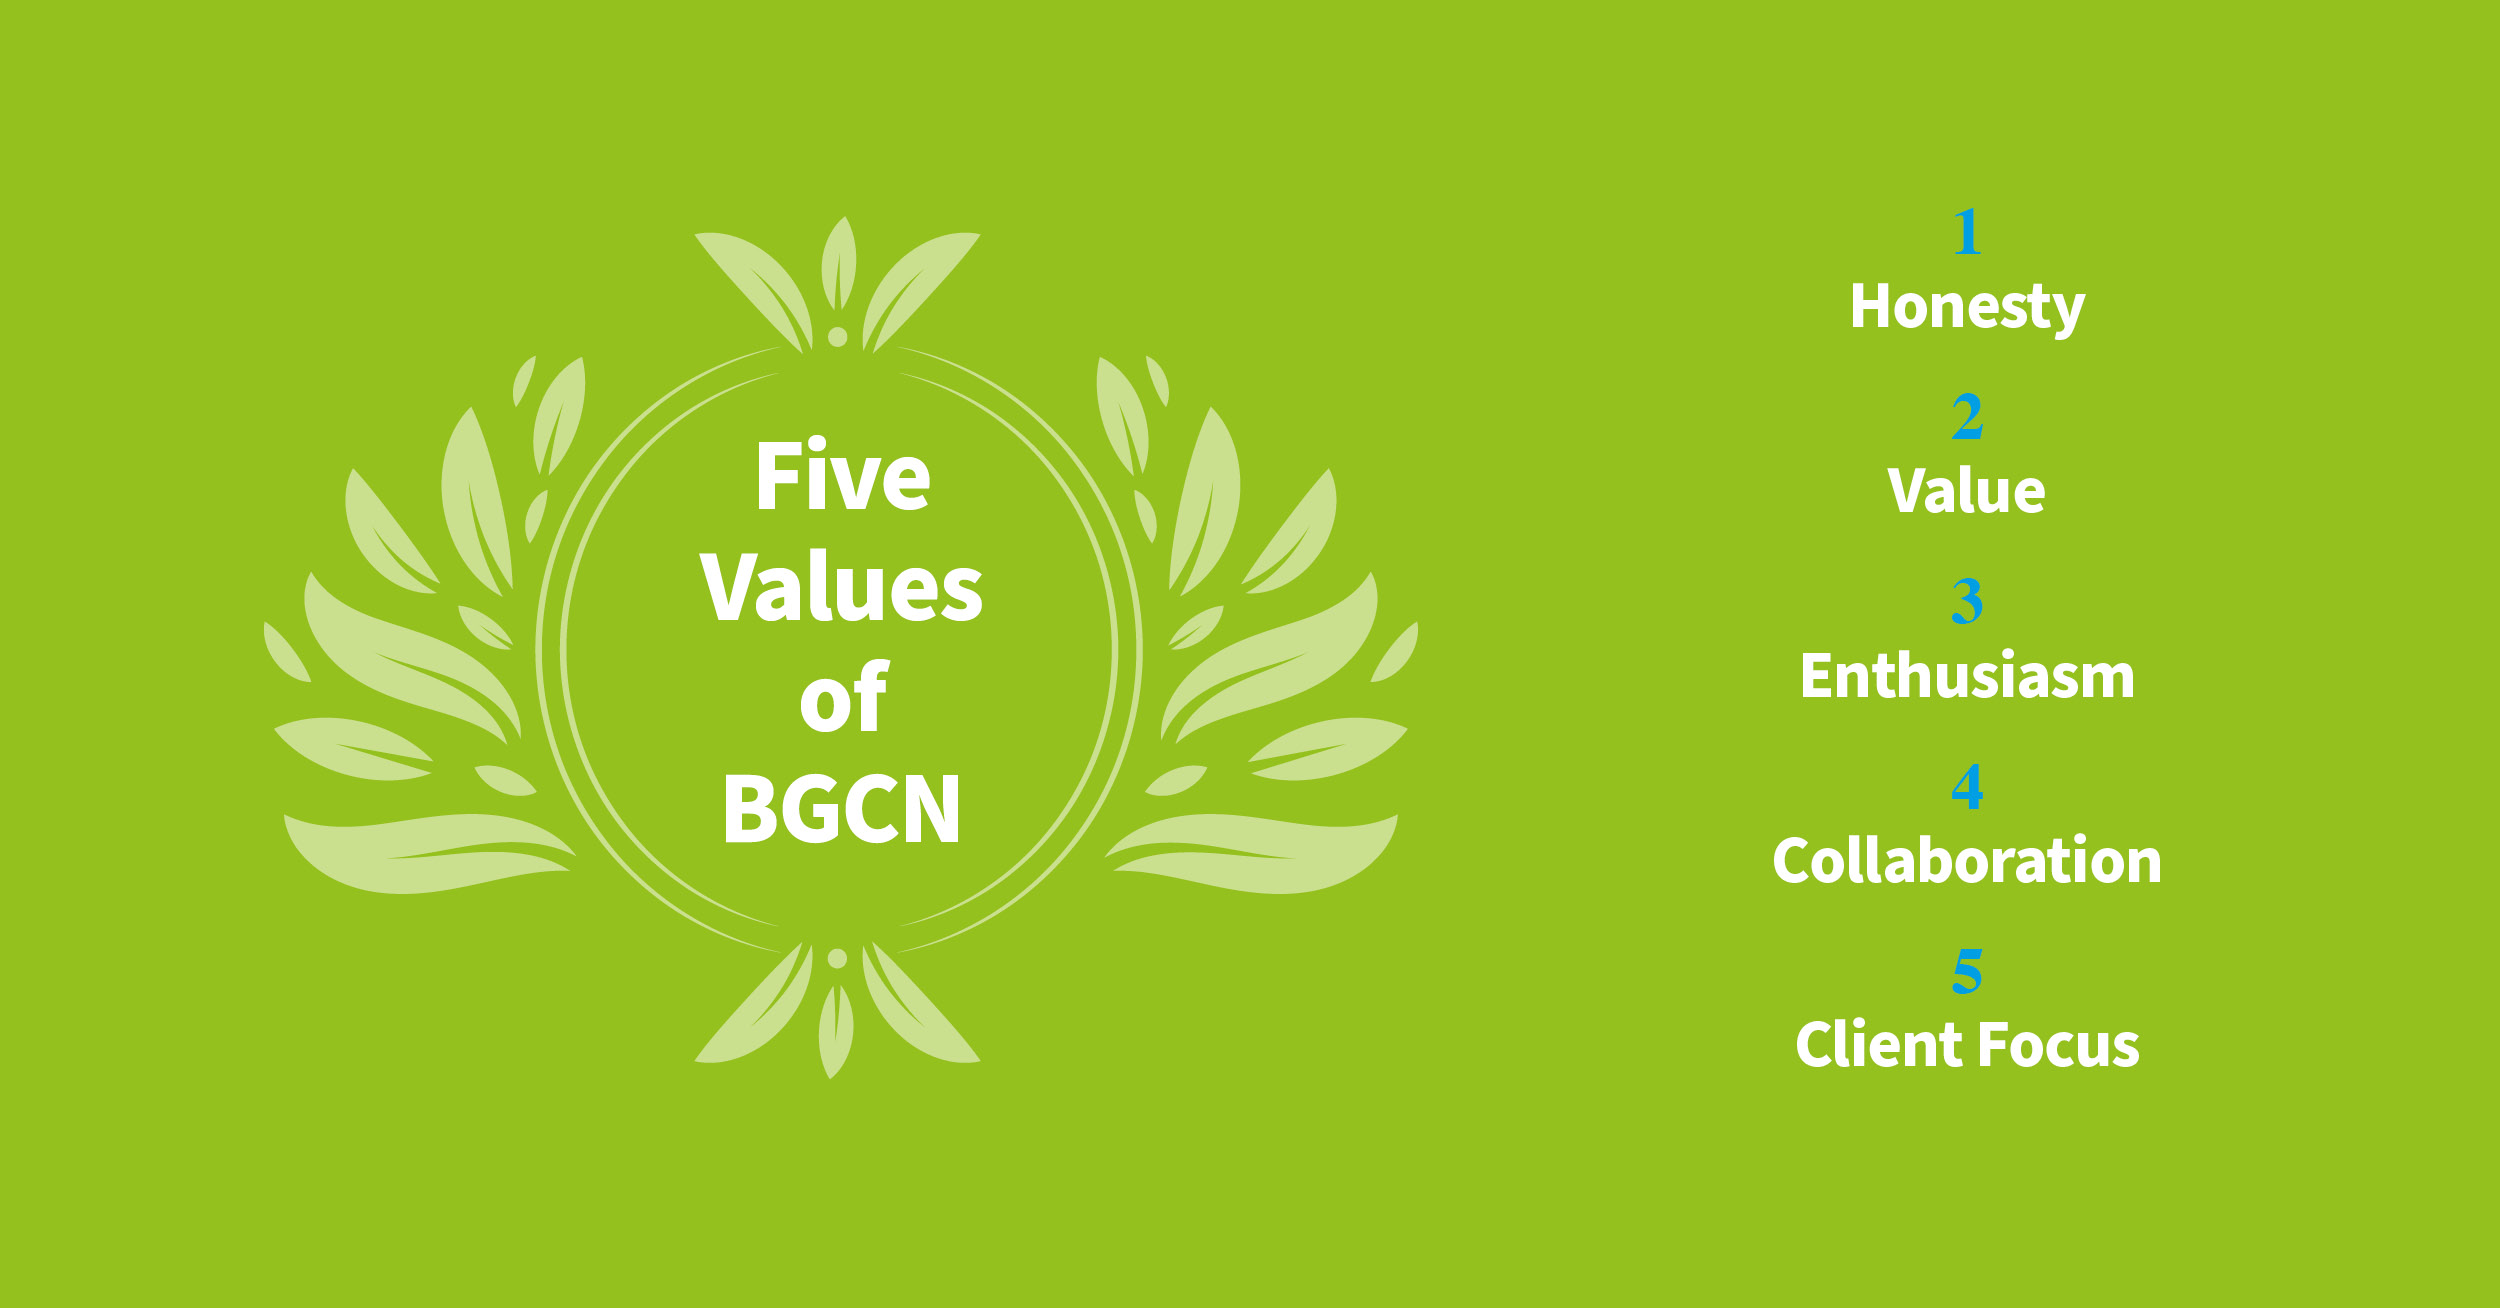 Graphic - The 5 Values of BGCN